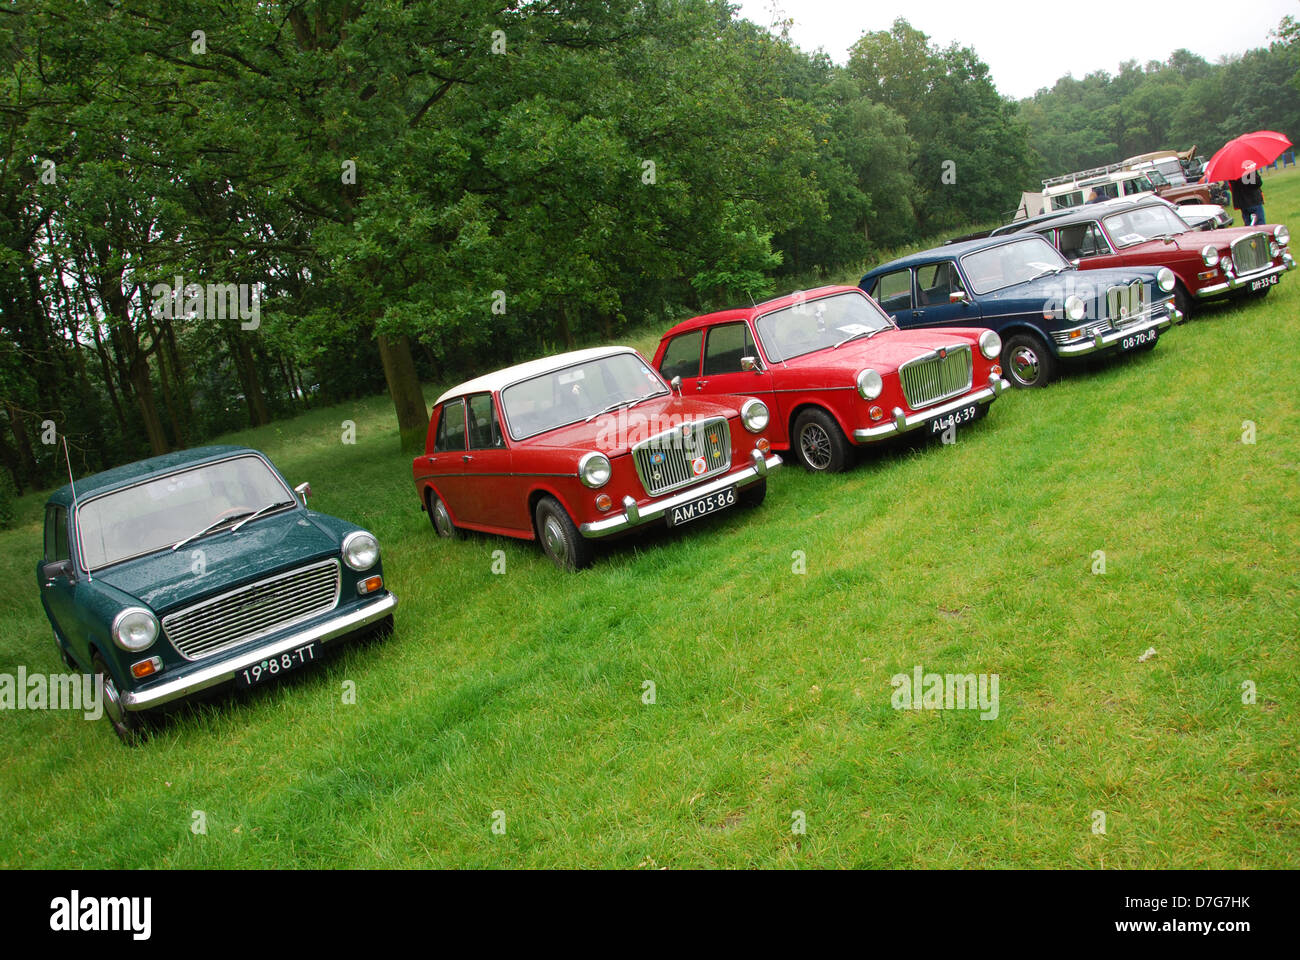 Line up of Classic BMC cars at Dutch Classic Car show Stock Photo